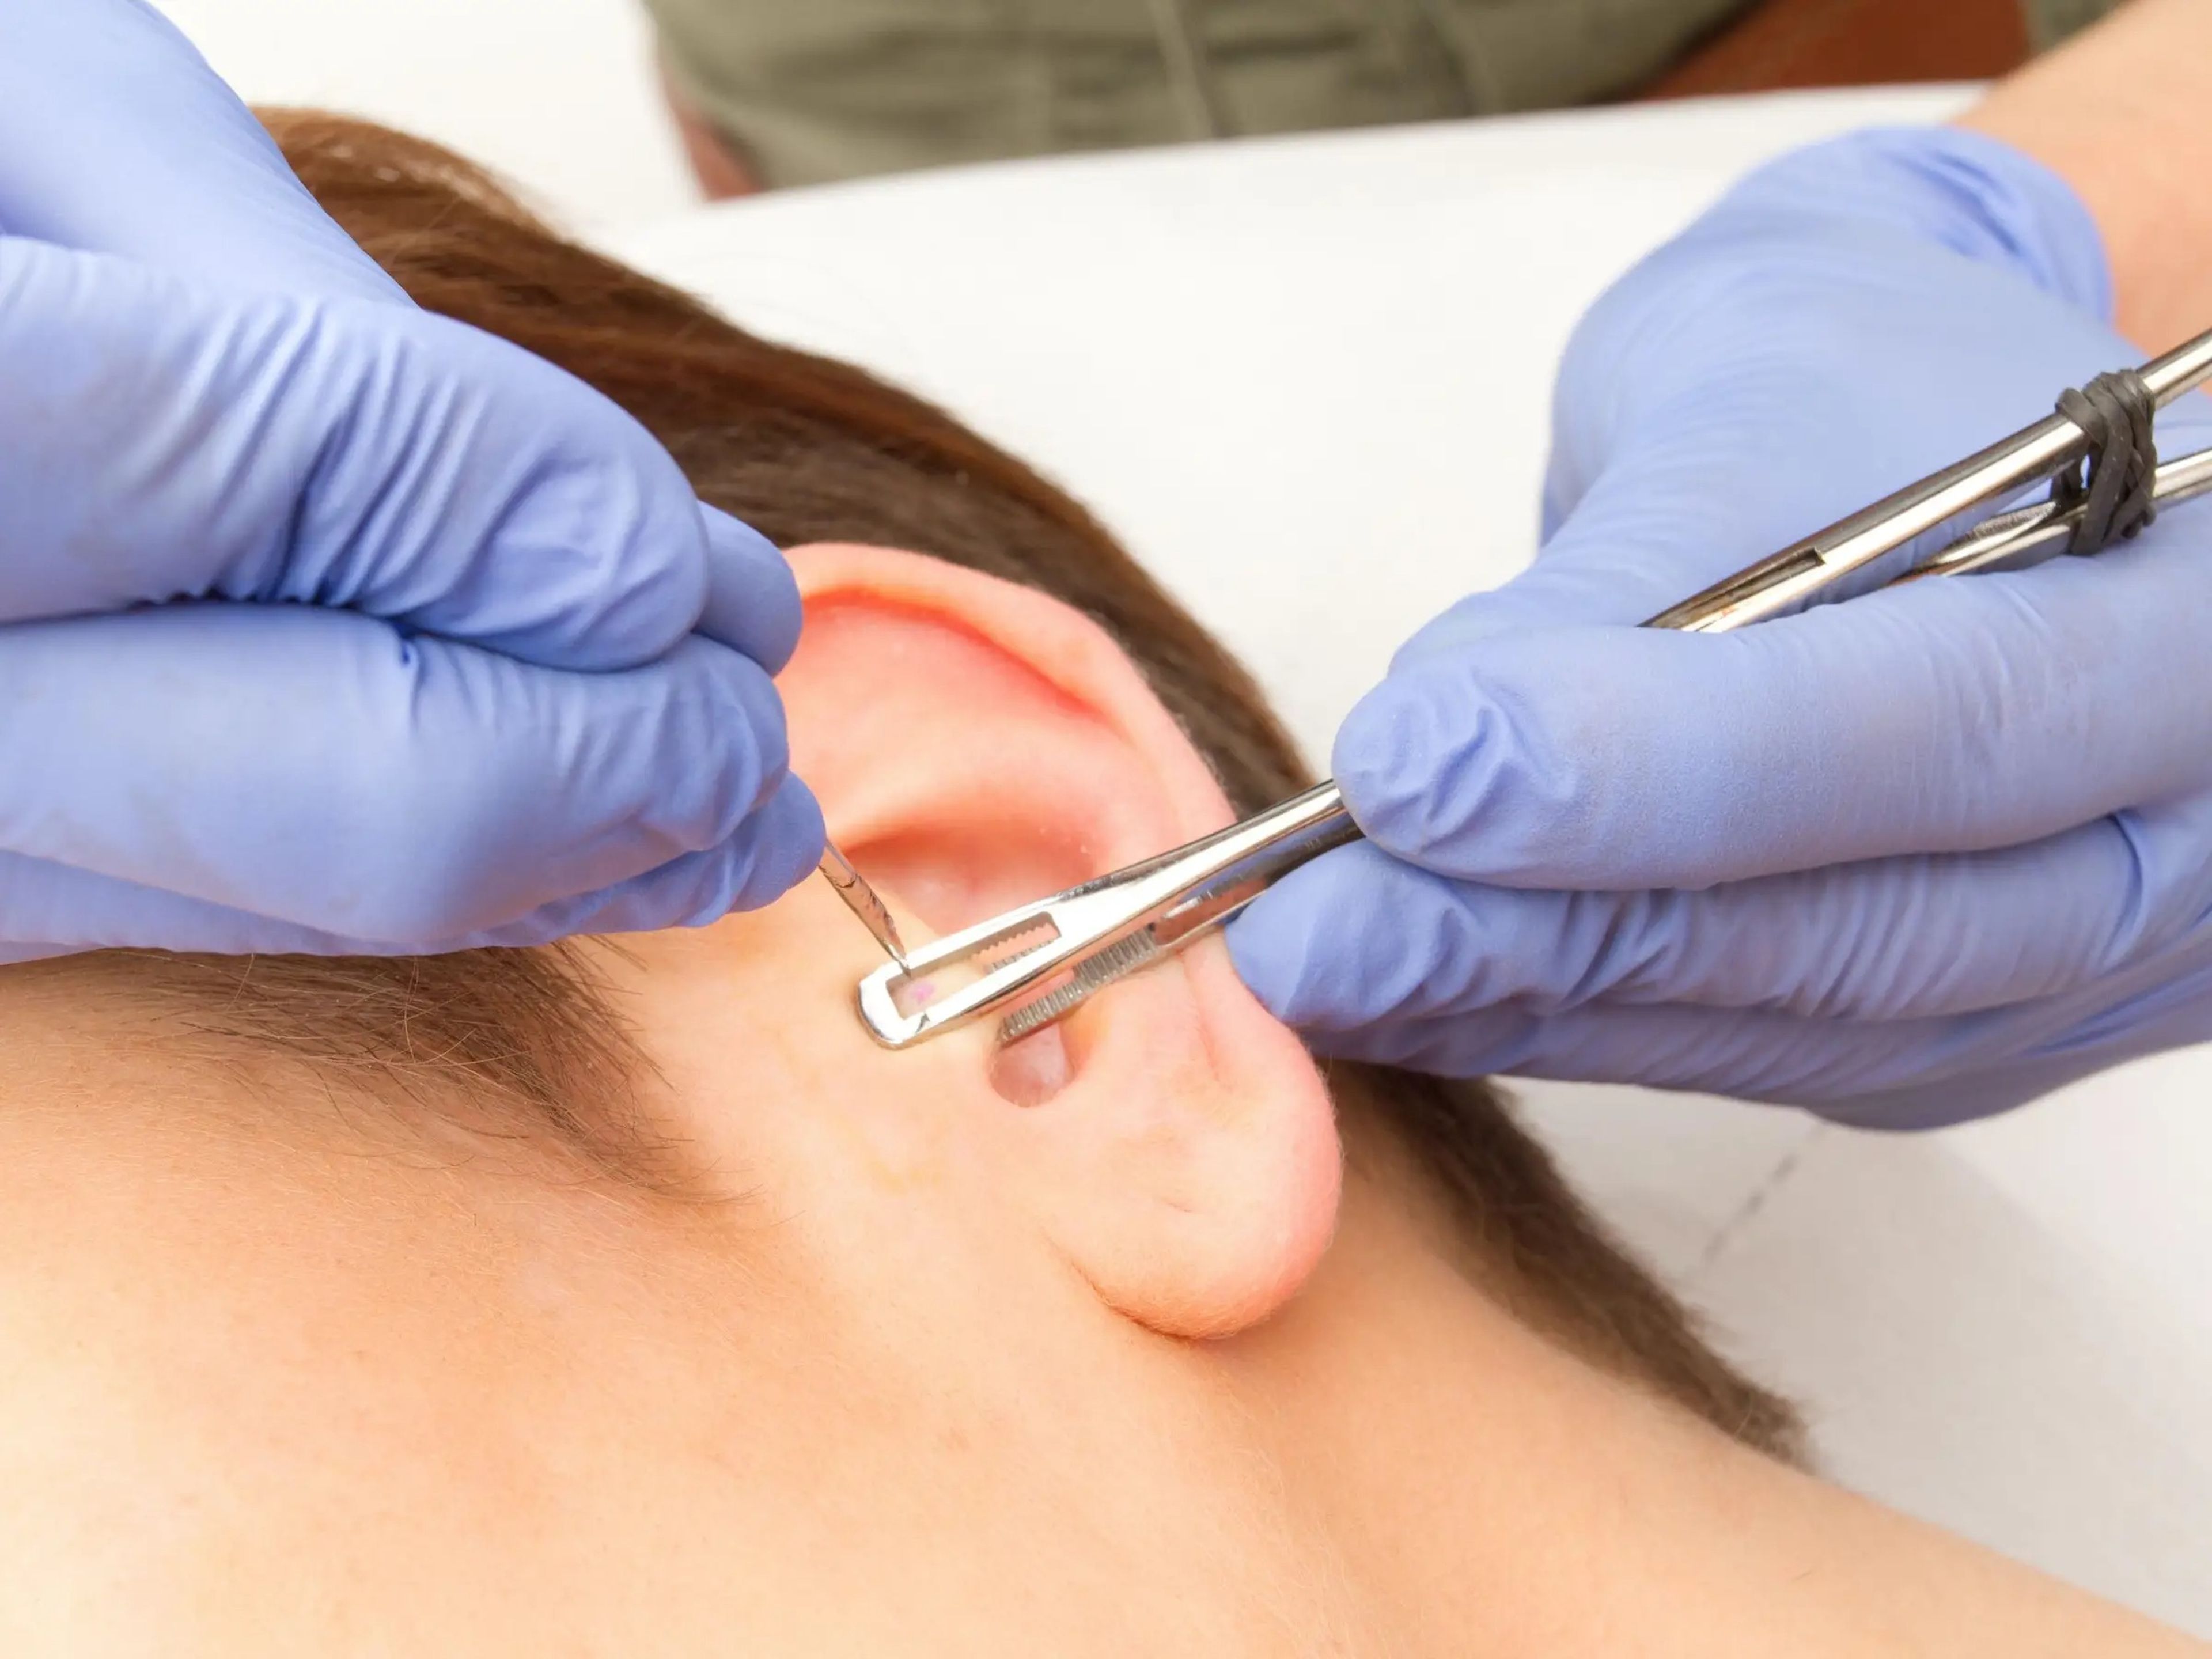 Experts shared with Insider different red flags to look out for when getting a new piercing.